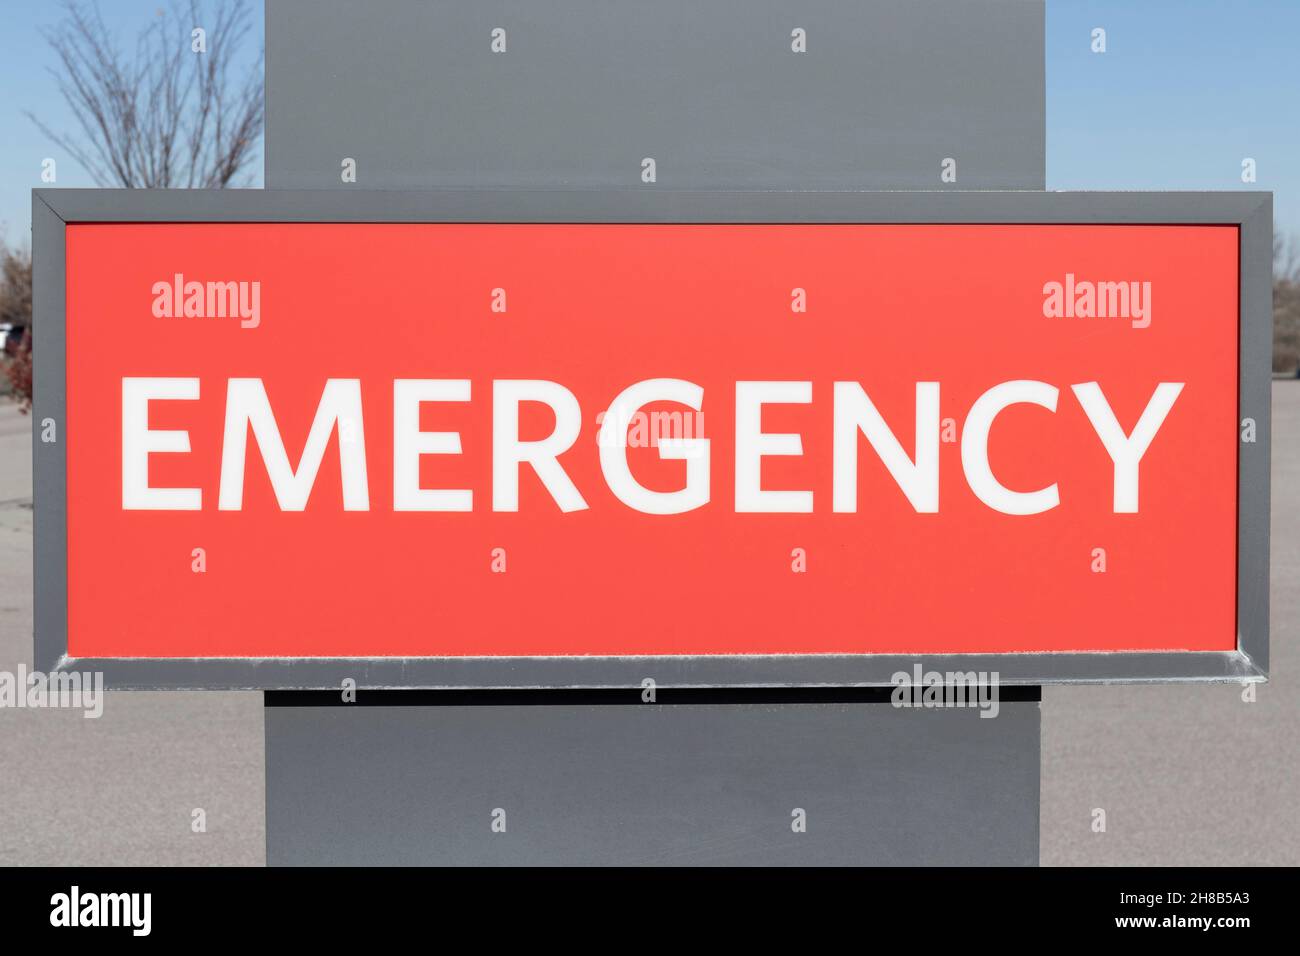 Emergency Entrance Sign for a Local Hospital in alert red. Stock Photo